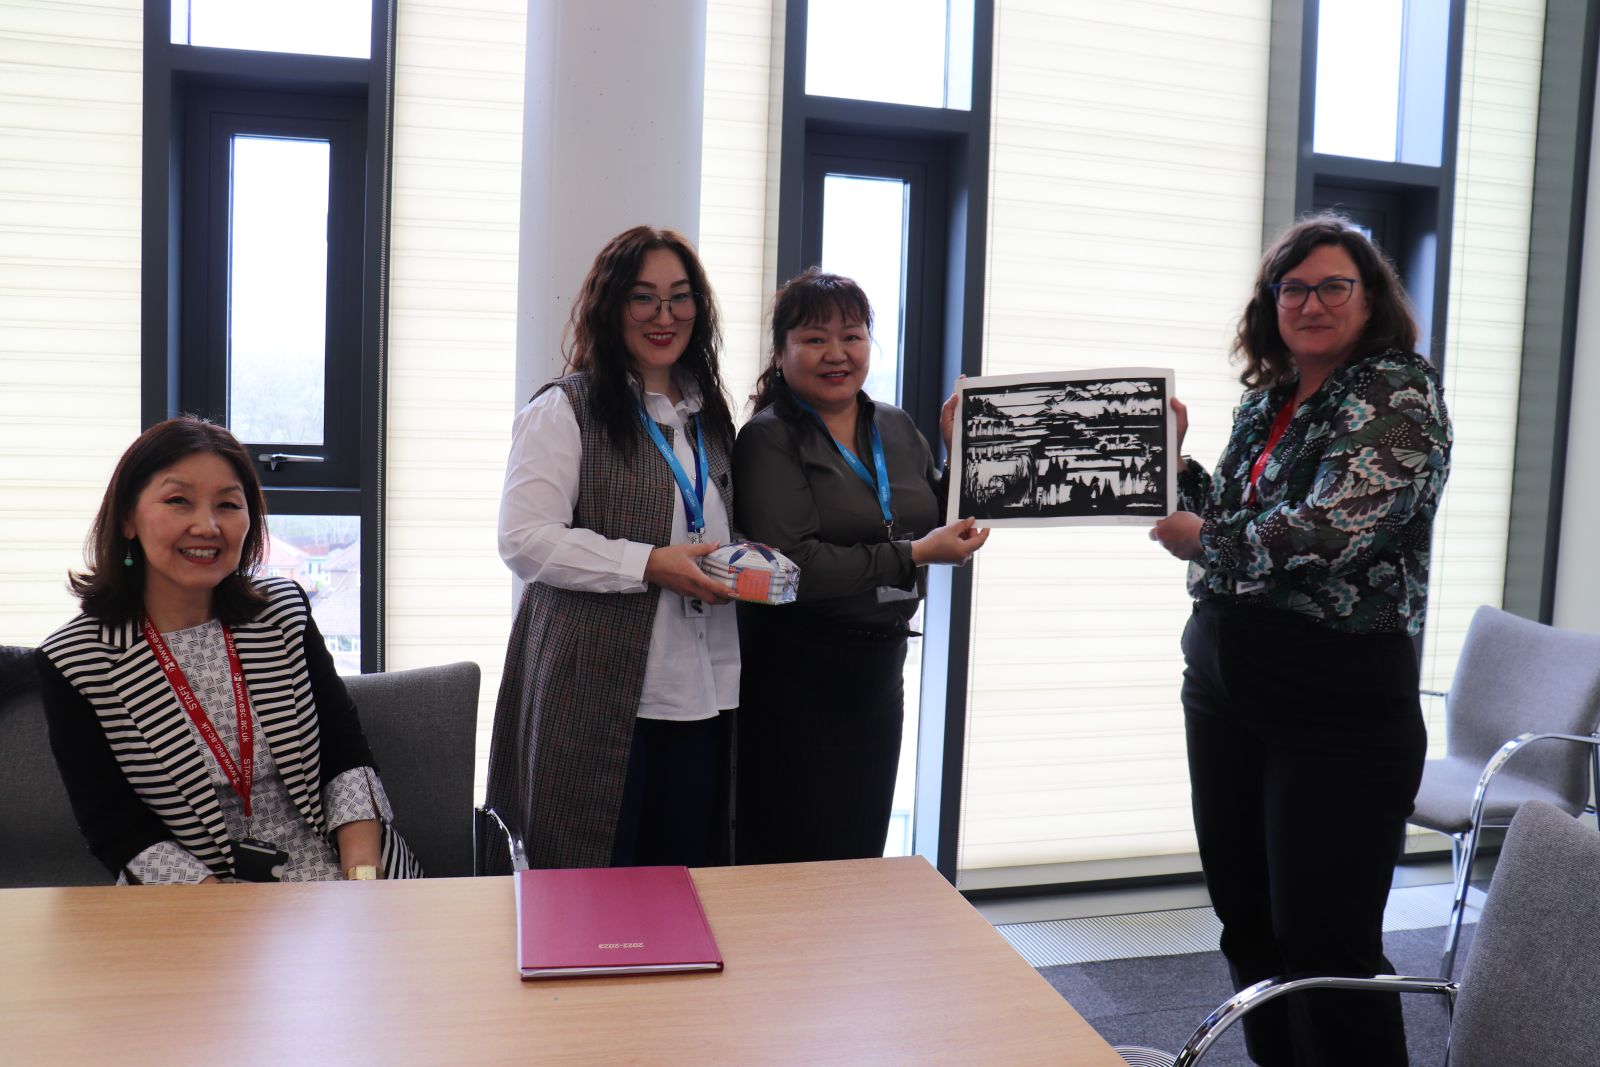 Meg Conacher and Rebecca Taylor being presented with a painting from two Mongolian visitors